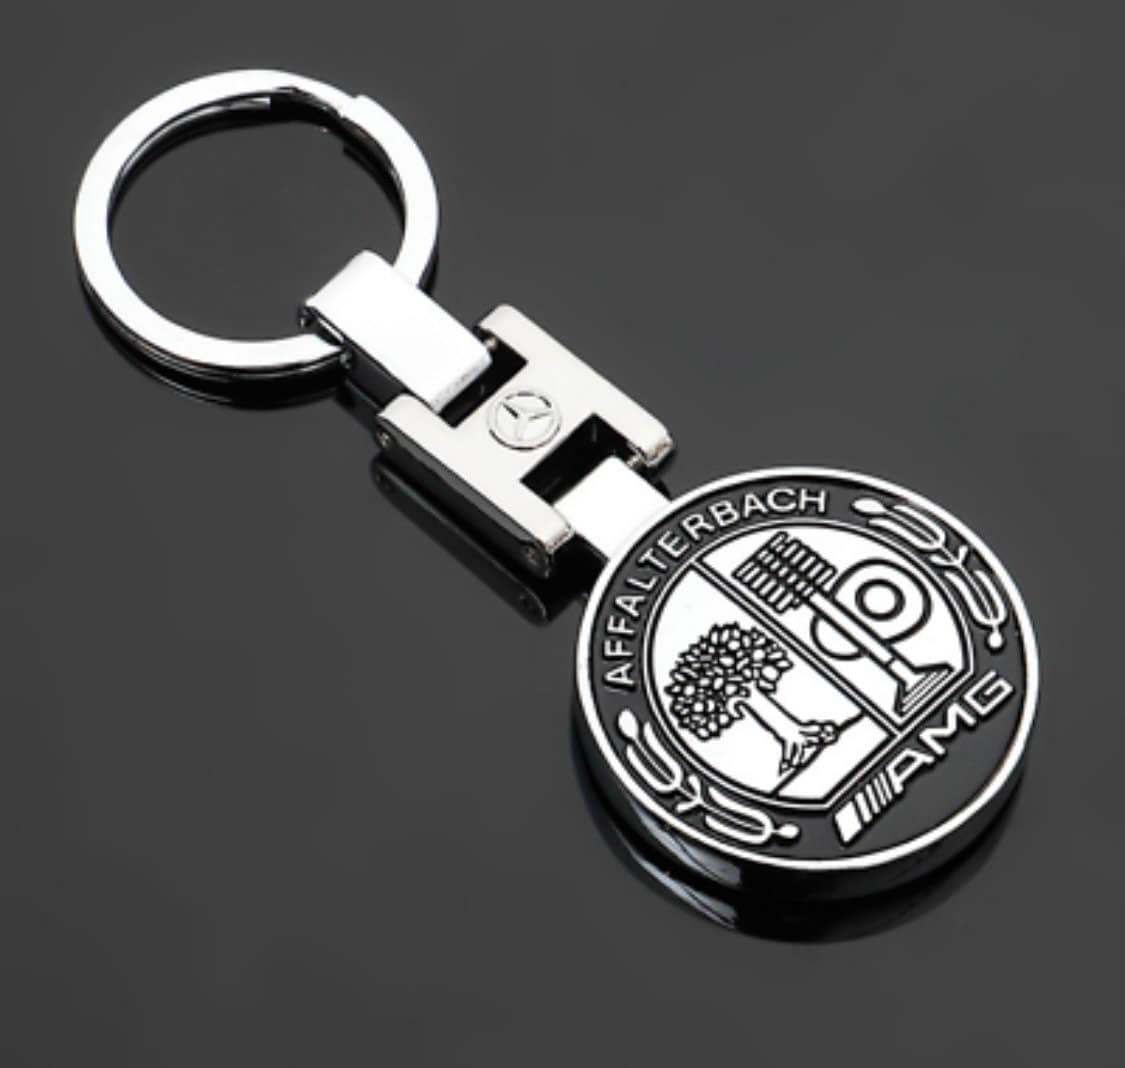 For Mercedes-Benz Logo Emblem Key Chain Key Ring Metal Alloy BV Style Black Leather Gift Decoration Accessories AMG Black 